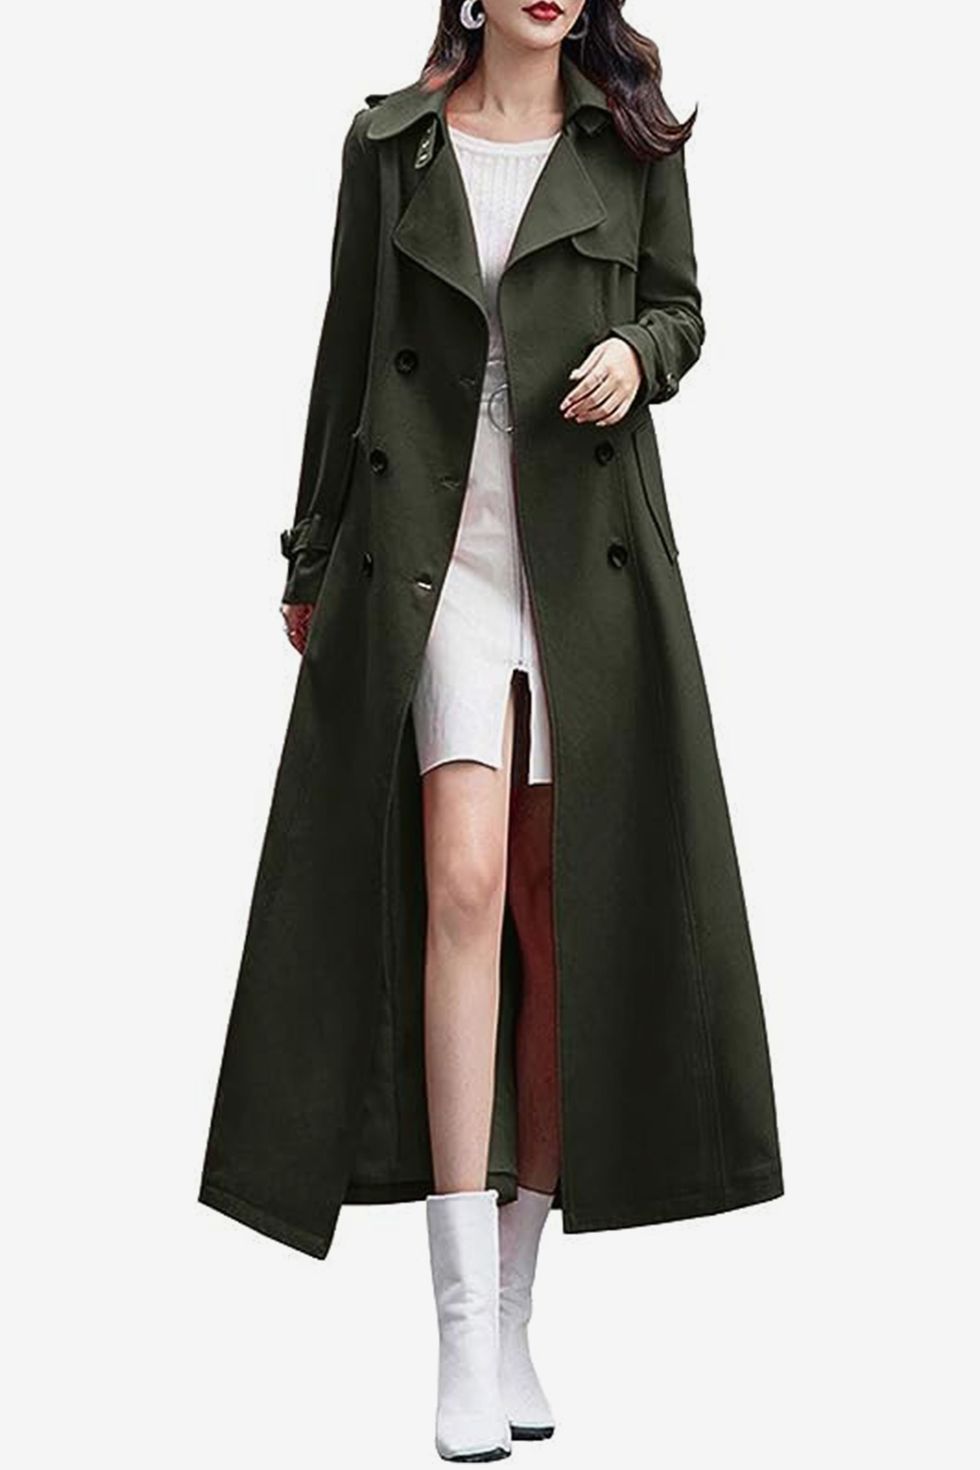 https://hips.hearstapps.com/vader-prod.s3.amazonaws.com/1694477544-ebossy-double-breasted-duster-trench-coat-64fface07251a.jpg?crop=1xw:1xh;center,top&resize=980:*